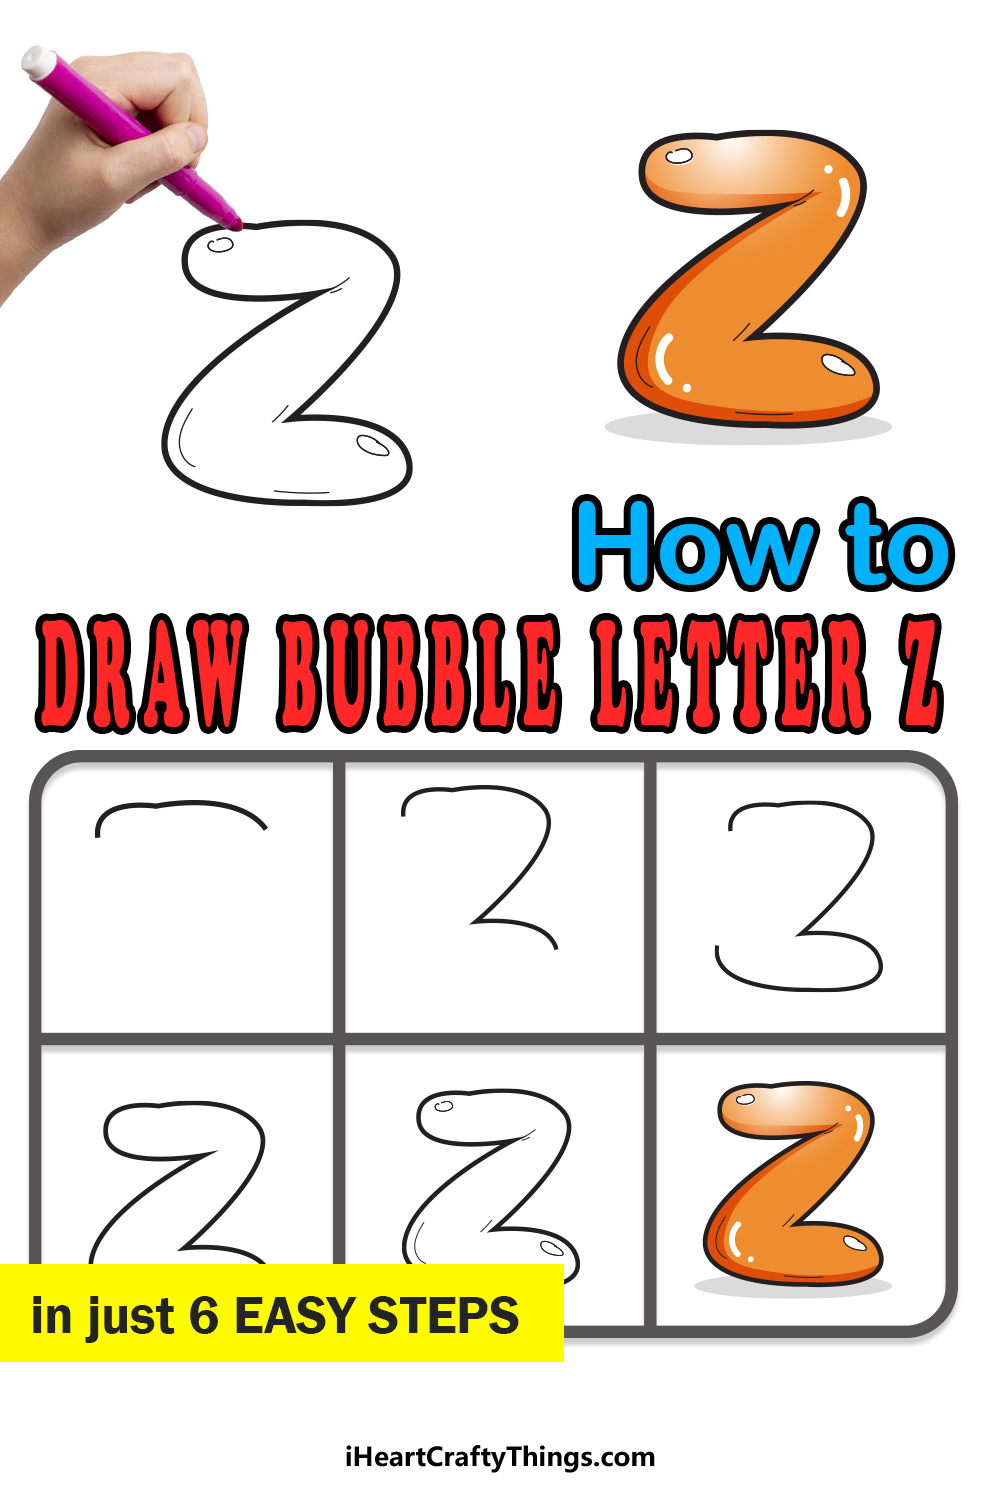 How To Draw Your Own Bubble Z step by step guide